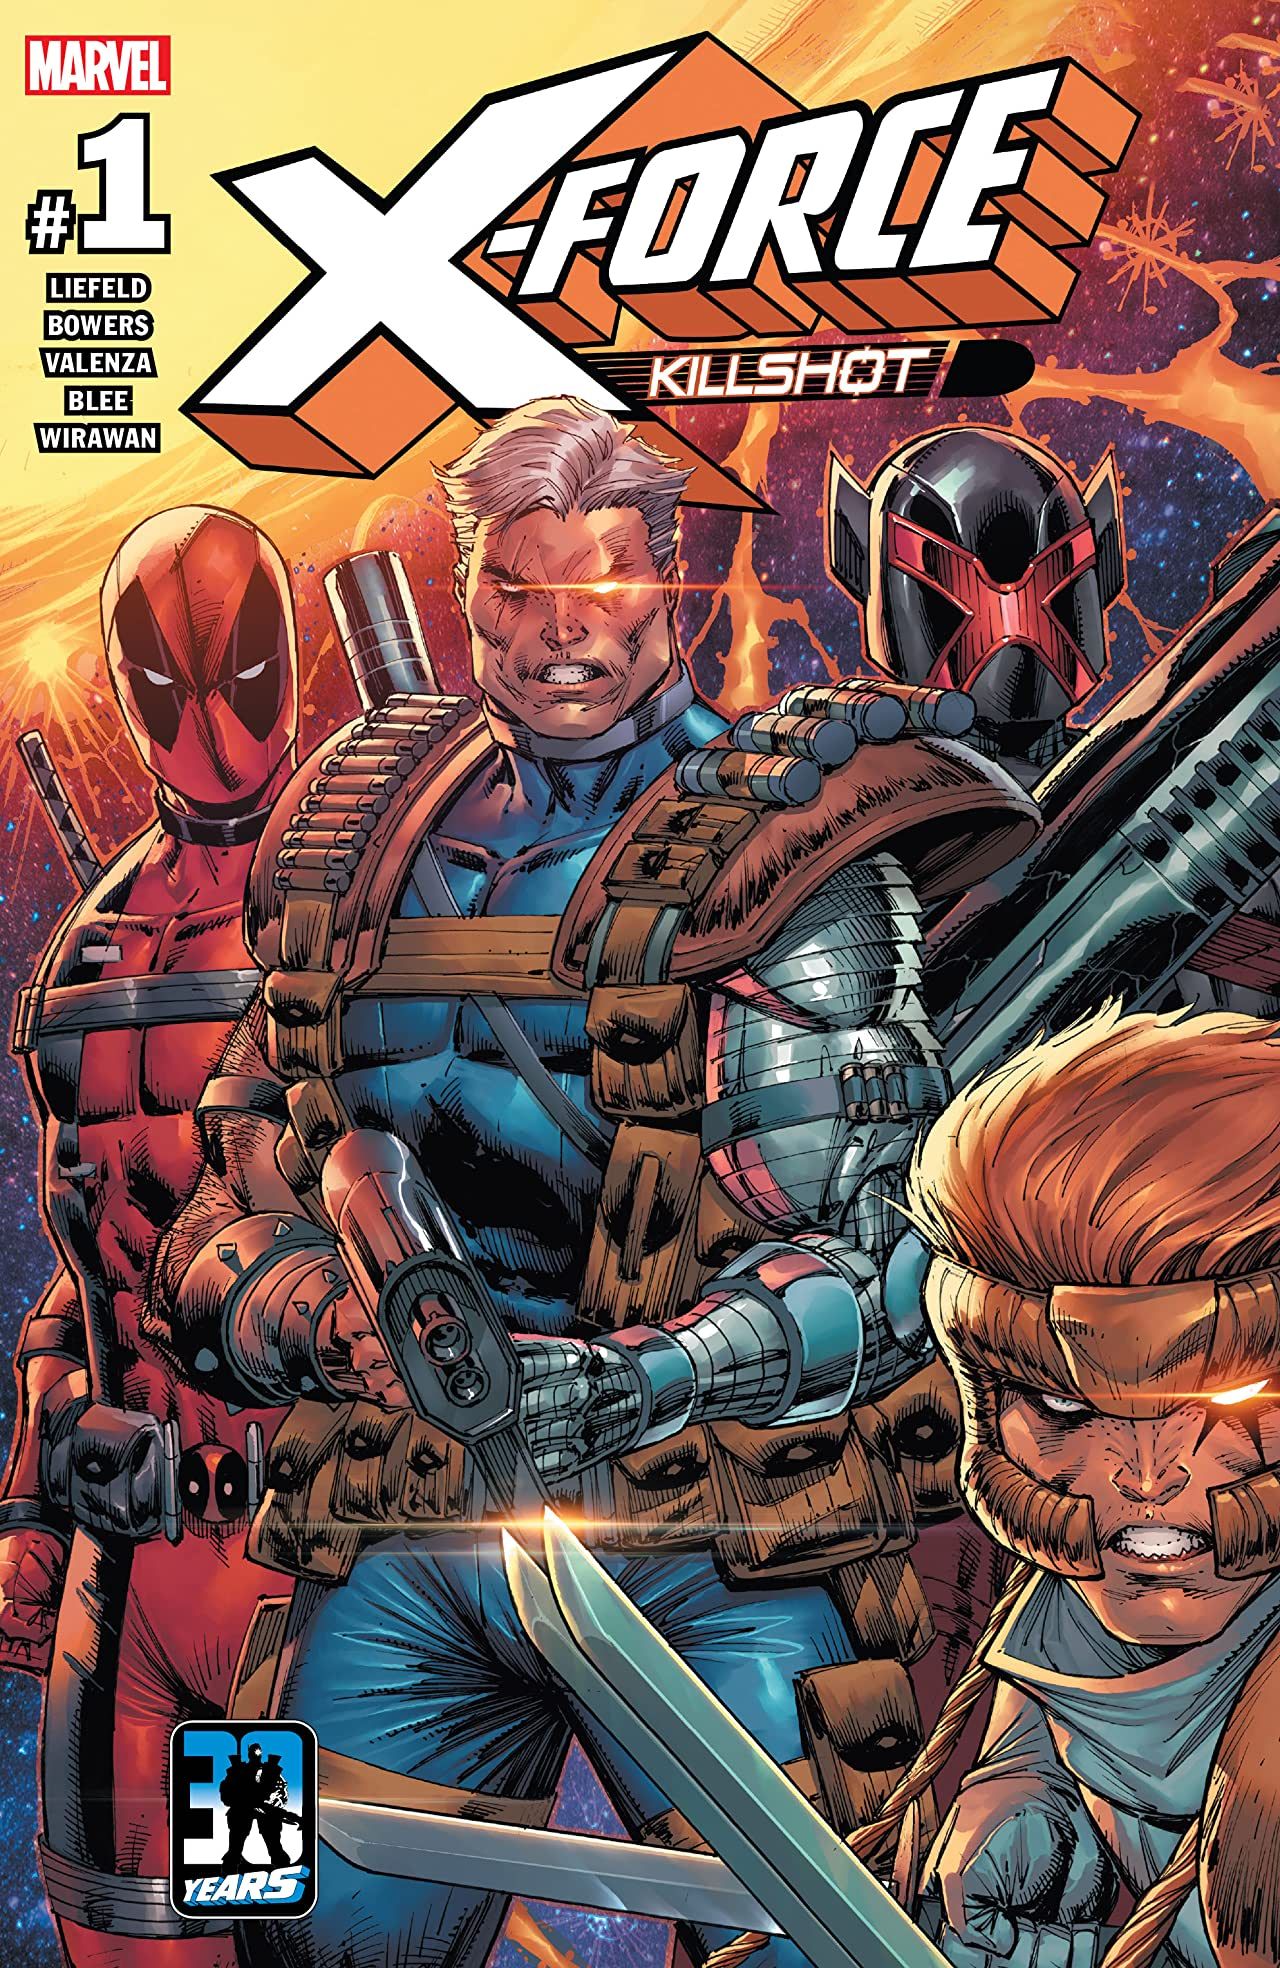 Marvel's X-Force: Killshot Anniversary Special #1 Is a Love Letter to 90s Comics